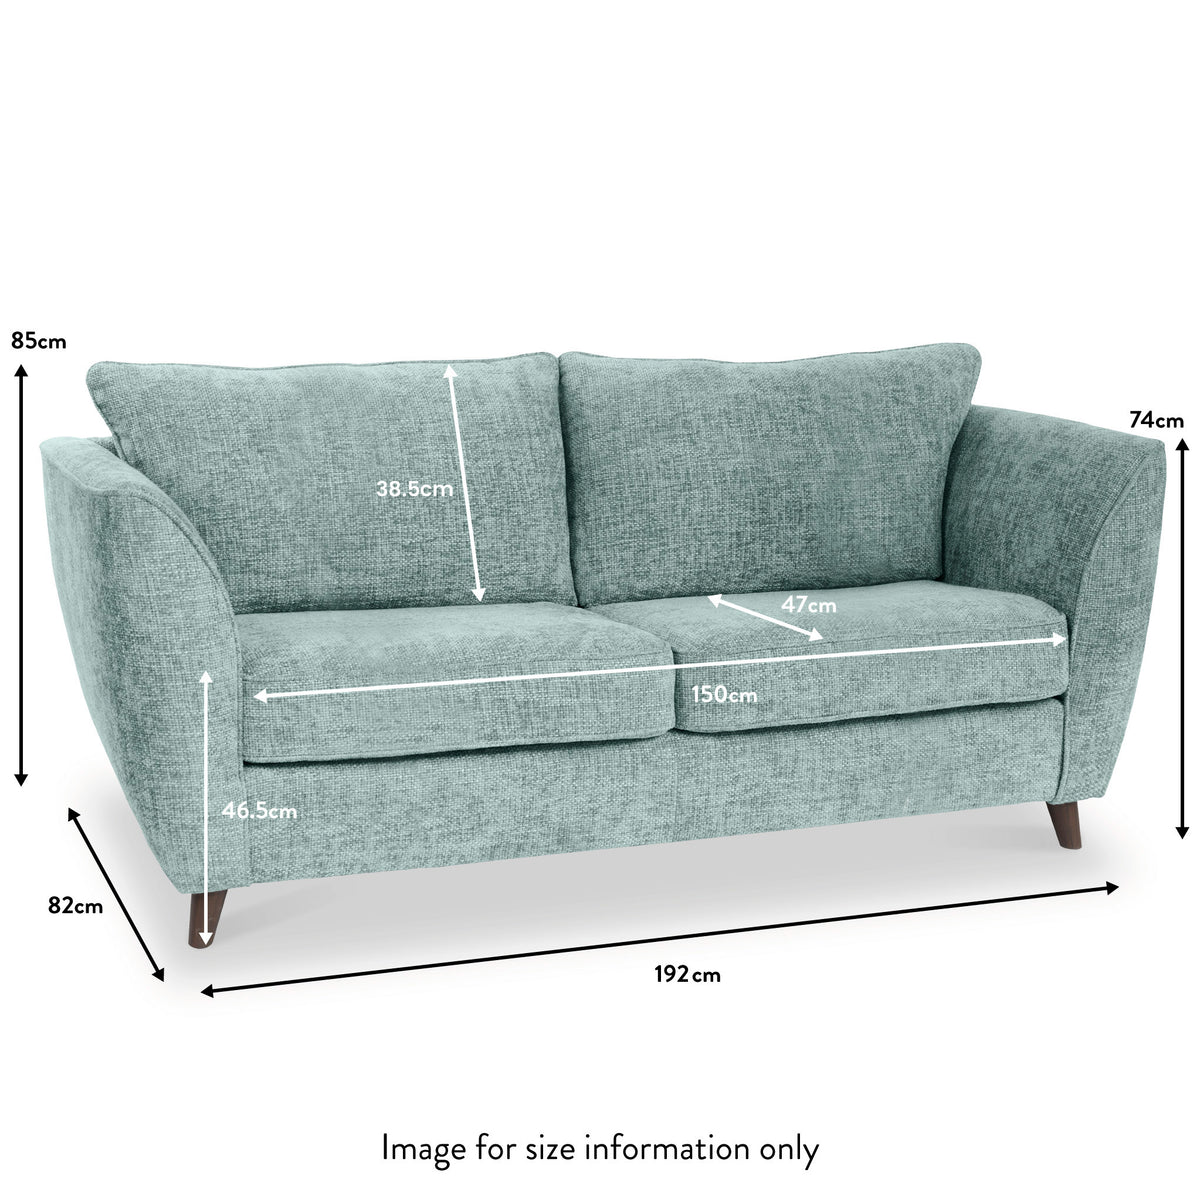 Tamsin 3 seater dimensions